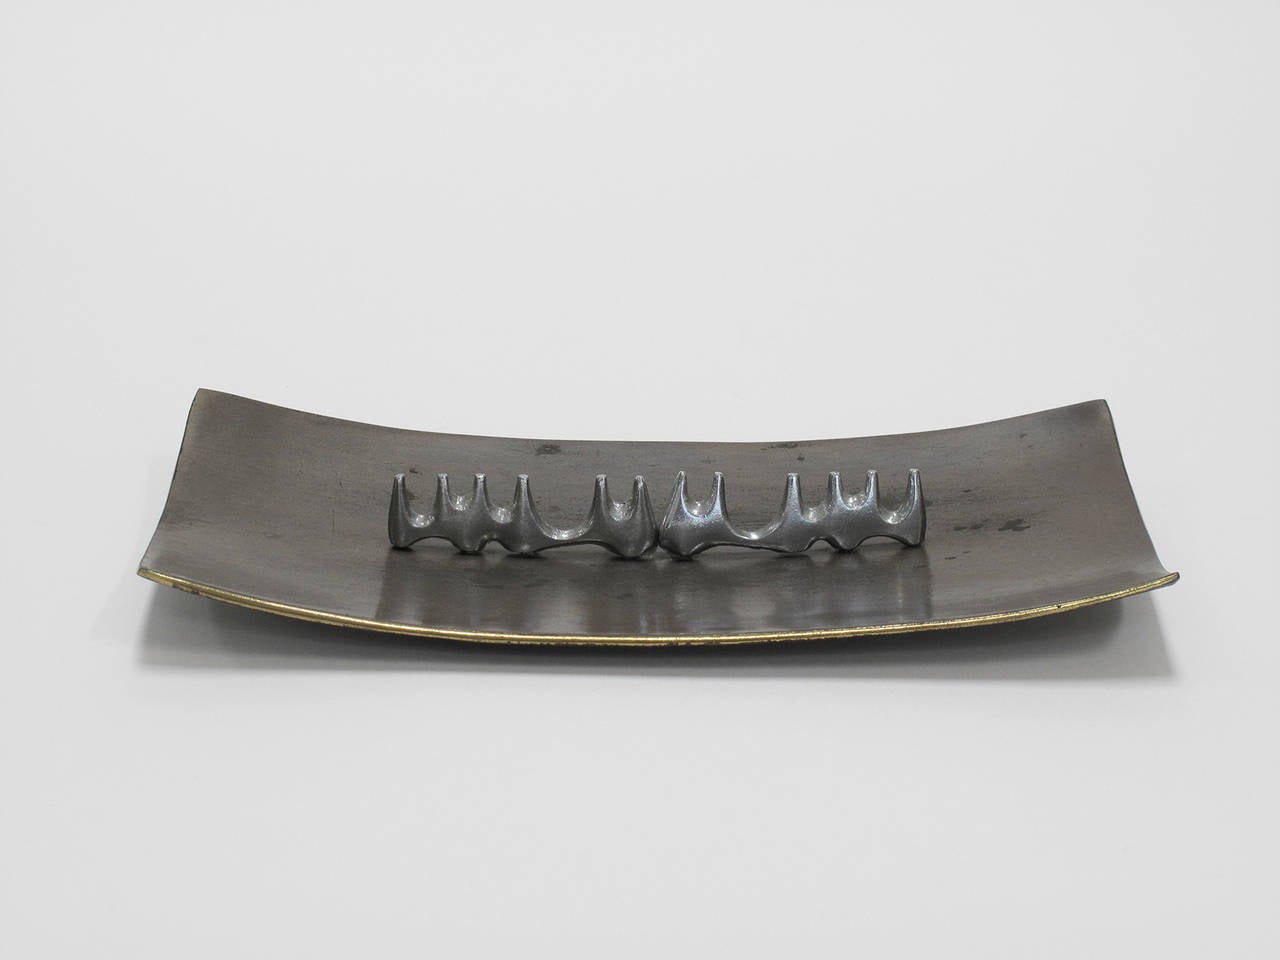 Long tray in brass-plated cast metal with a satin chrome, mountain range shaped row of cigar and cigarette resters lining the middle, designed by Ben Seibel and made by Maison Gourmet, a Product of Jenfred Ware, New York, 1950s.